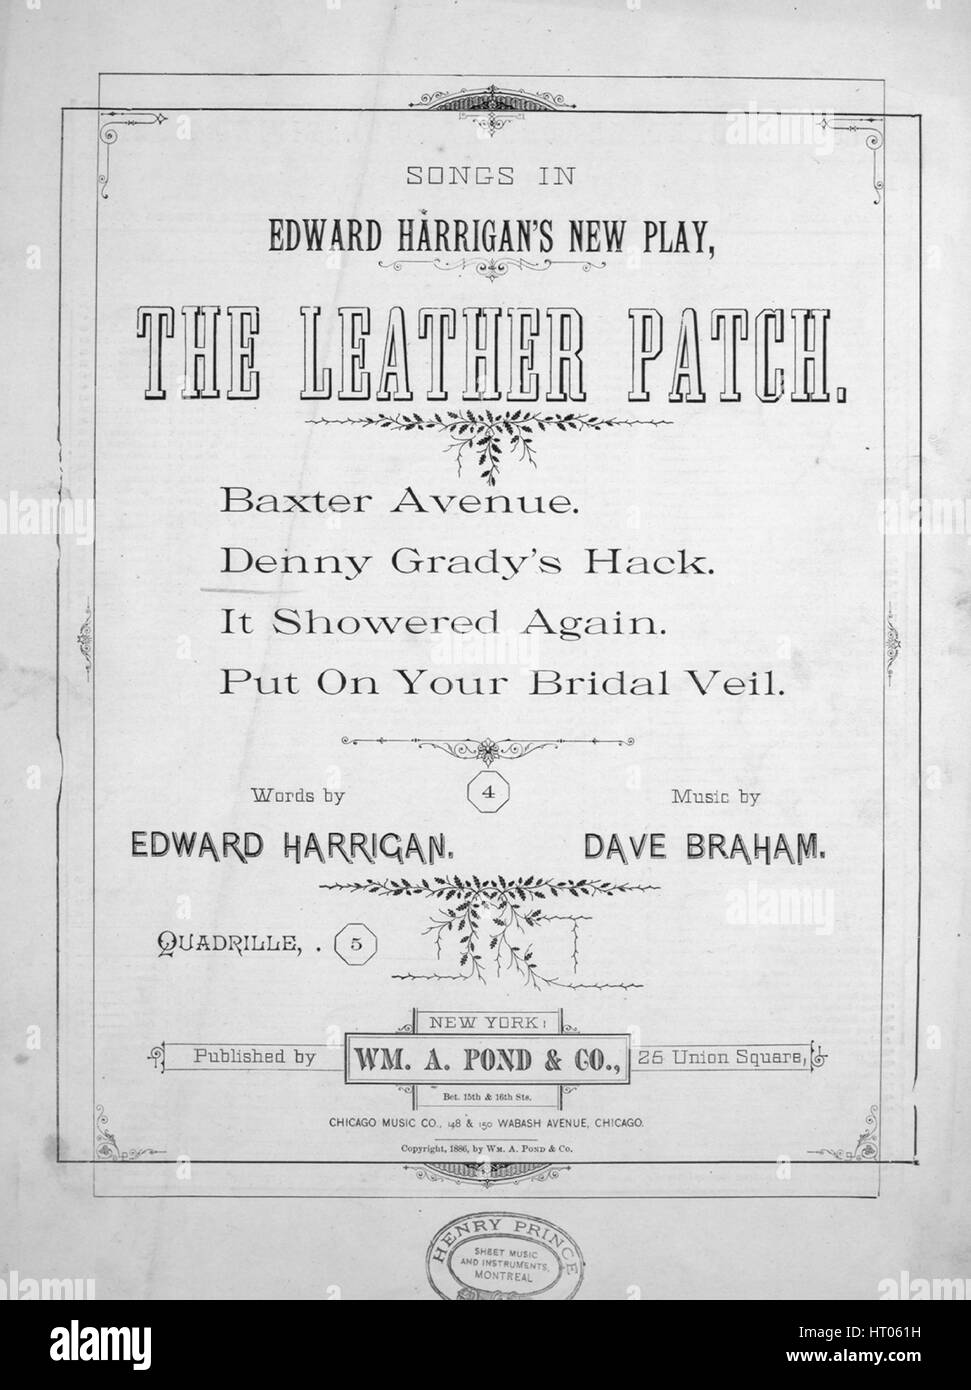 Sheet music cover image of the song 'Songs in Edward Harrigan's New Play, The Leather Patch Denny Grady's Hack', with original authorship notes reading 'Words by Edward Harrigan Music by Dave Braham', United States, 1886. The publisher is listed as 'Wm. A. Pond and Co., 25 Union Square, (Broadway, bet. 15th and 16th Sts.)', the form of composition is 'strophic with chorus', the instrumentation is 'piano and voice', the first line reads 'Last Sunday morning gaily, Tom Quinn and Mary Haley', and the illustration artist is listed as 'J.M. Armstrong and Co. Music Typographer, 710 Sansom St., Phila Stock Photo